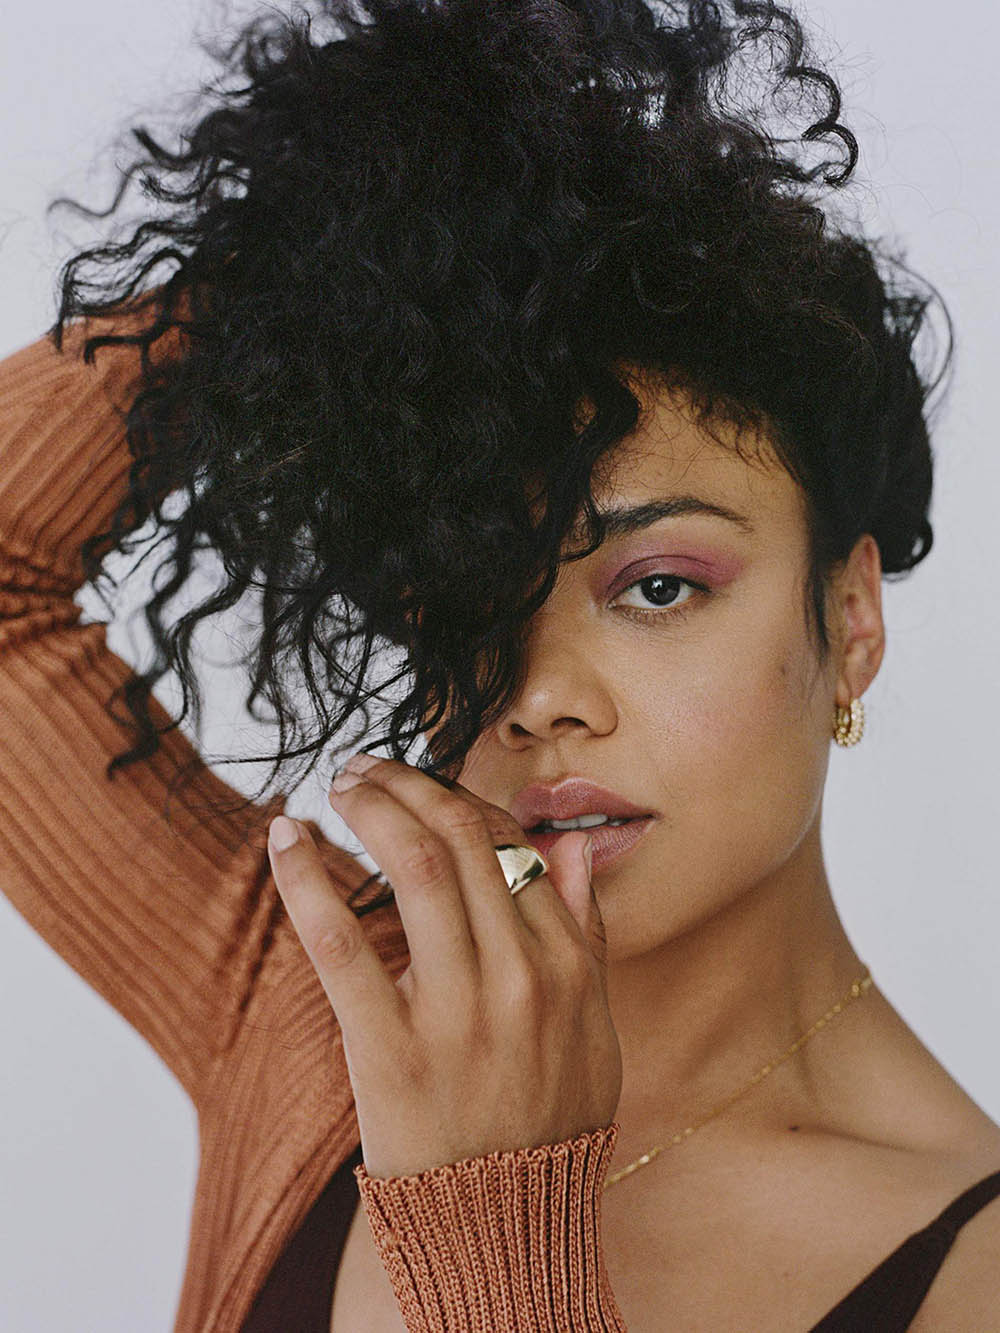 Tessa Thompson covers Porter Magazine August 10th, 2020 by Shaniqwa Jarvis